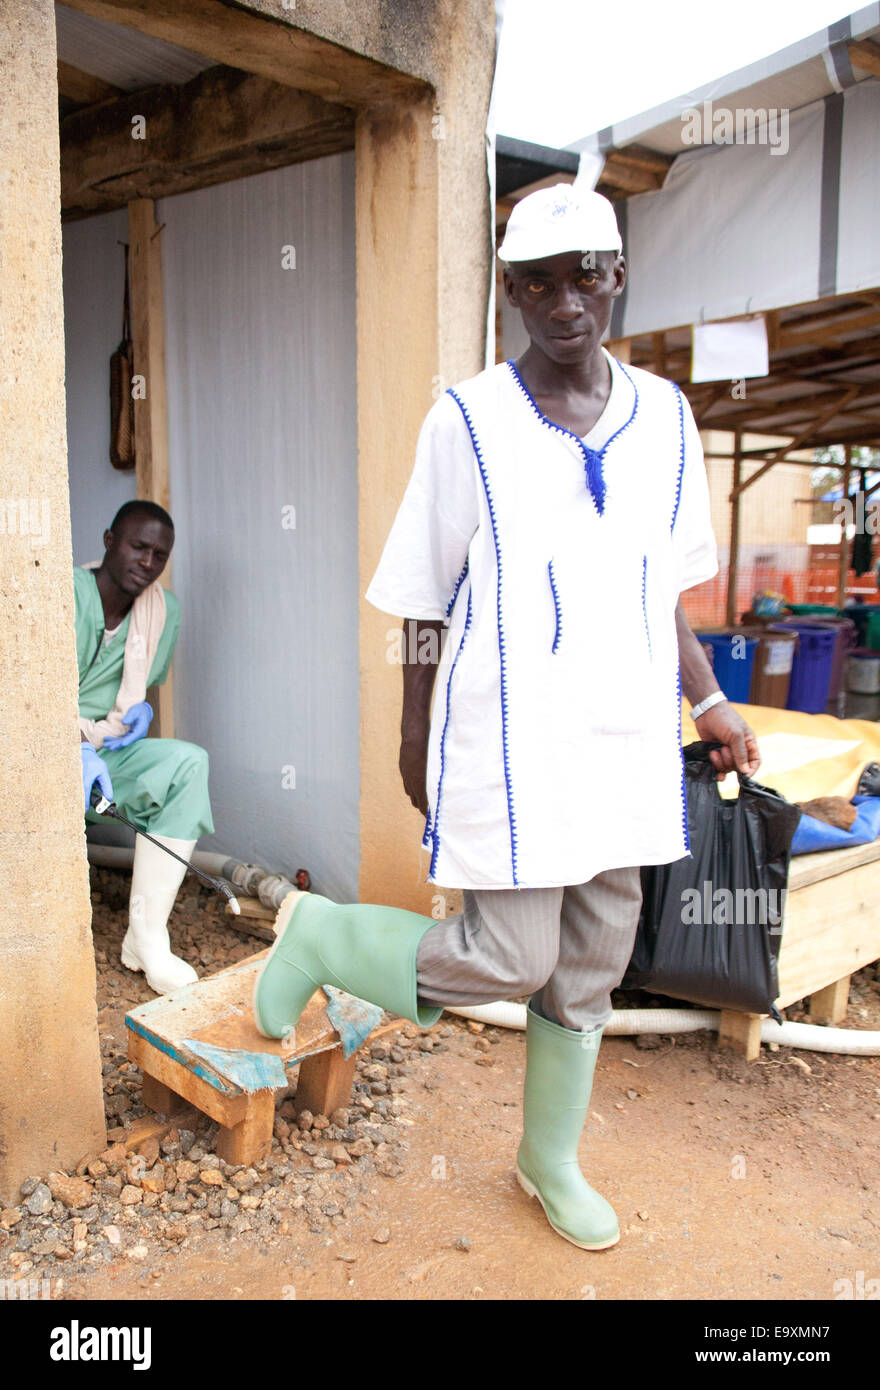 Gueckedou, Guinea. 16th Oct, 2014. A staff member is being disinfected as he leaves the ebola treatment centre in Gueckedou, Guinea, 16 October 2014. Former ebola patients, who are immune after contracting and surviving the ebola virus, are now organising help initiatives for people affected by the ebola virus to help themselves. While some are taking care of children who contracted ebola, others are involved in the struggle against stigmatisation, information campaigns or are taking care of patients. Photo: Kristin Palitza/dpa/Alamy Live News Stock Photo